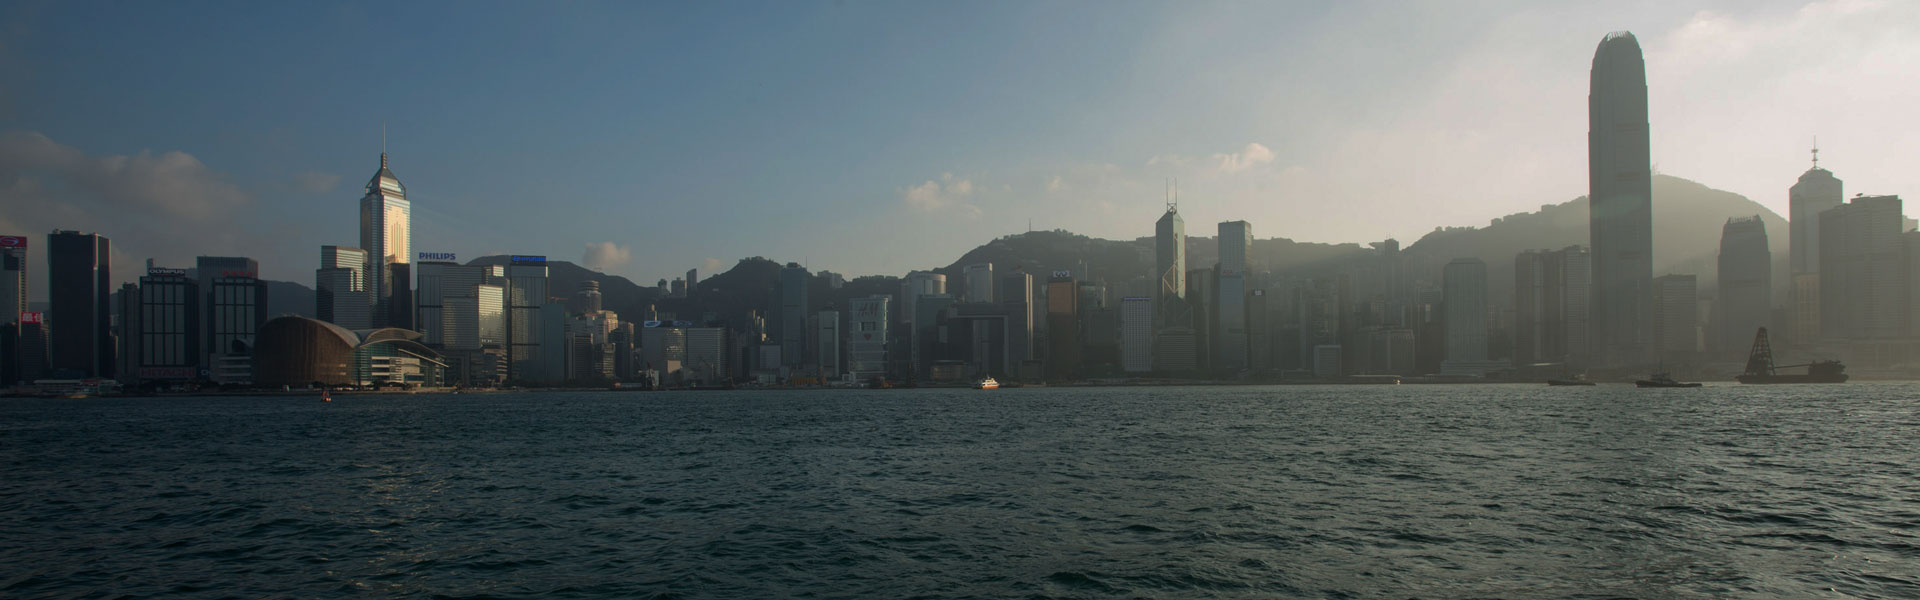 View of Hong Kong's Victoria Harbour in the Afternoon